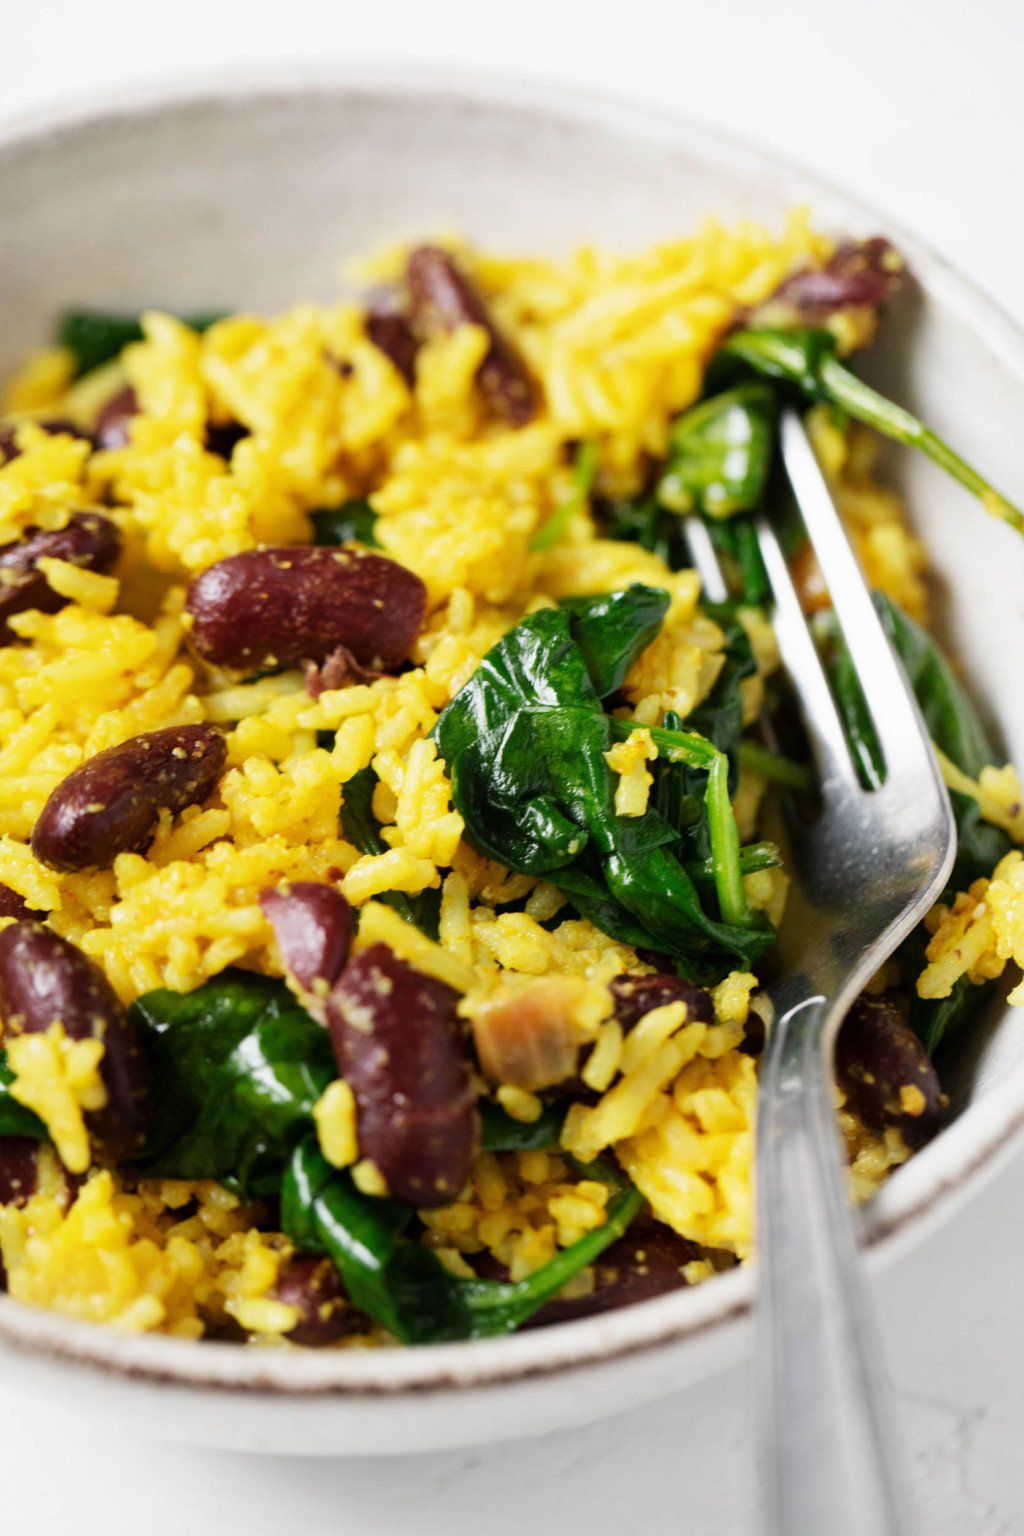 A close-up image of rice that's been cooked with turmeric, kidney beans, and spinach.